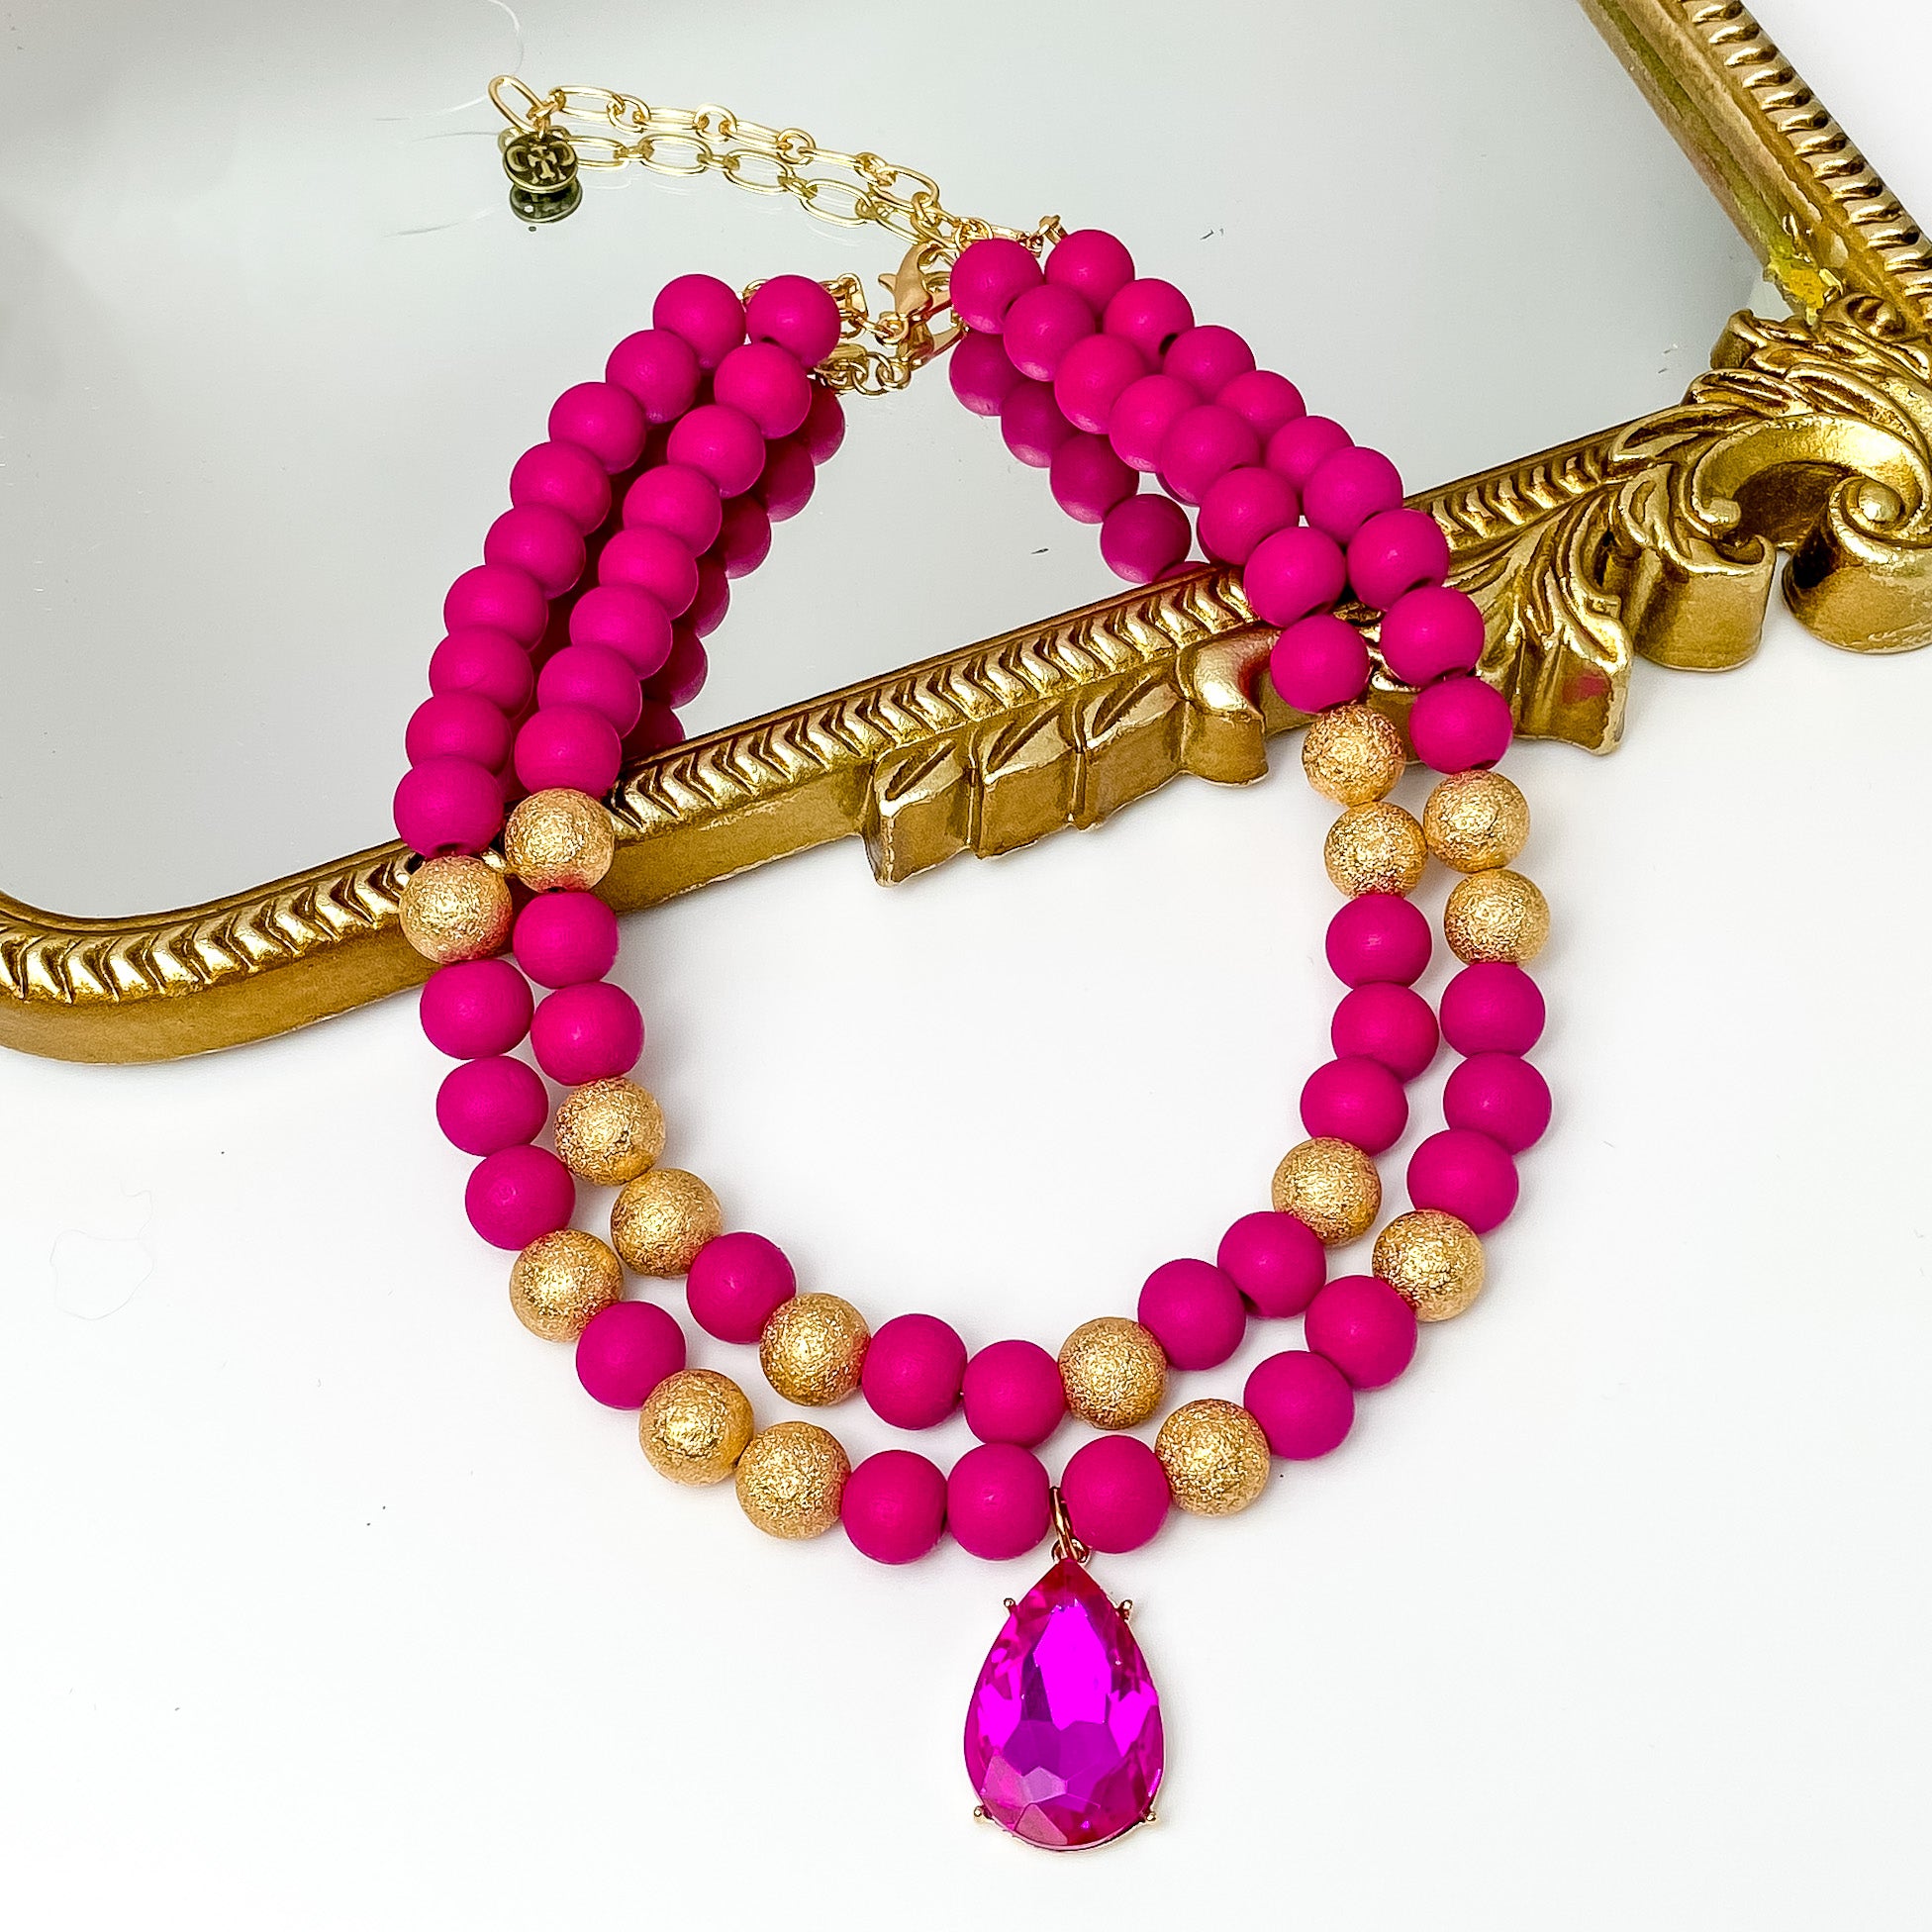 Two strand beaded necklace with a large fuchsia crystal teardrop pendant. This necklace includes fuchsia and gold beads. This necklace is pictured partially laying on a gold mirror on a white background. 